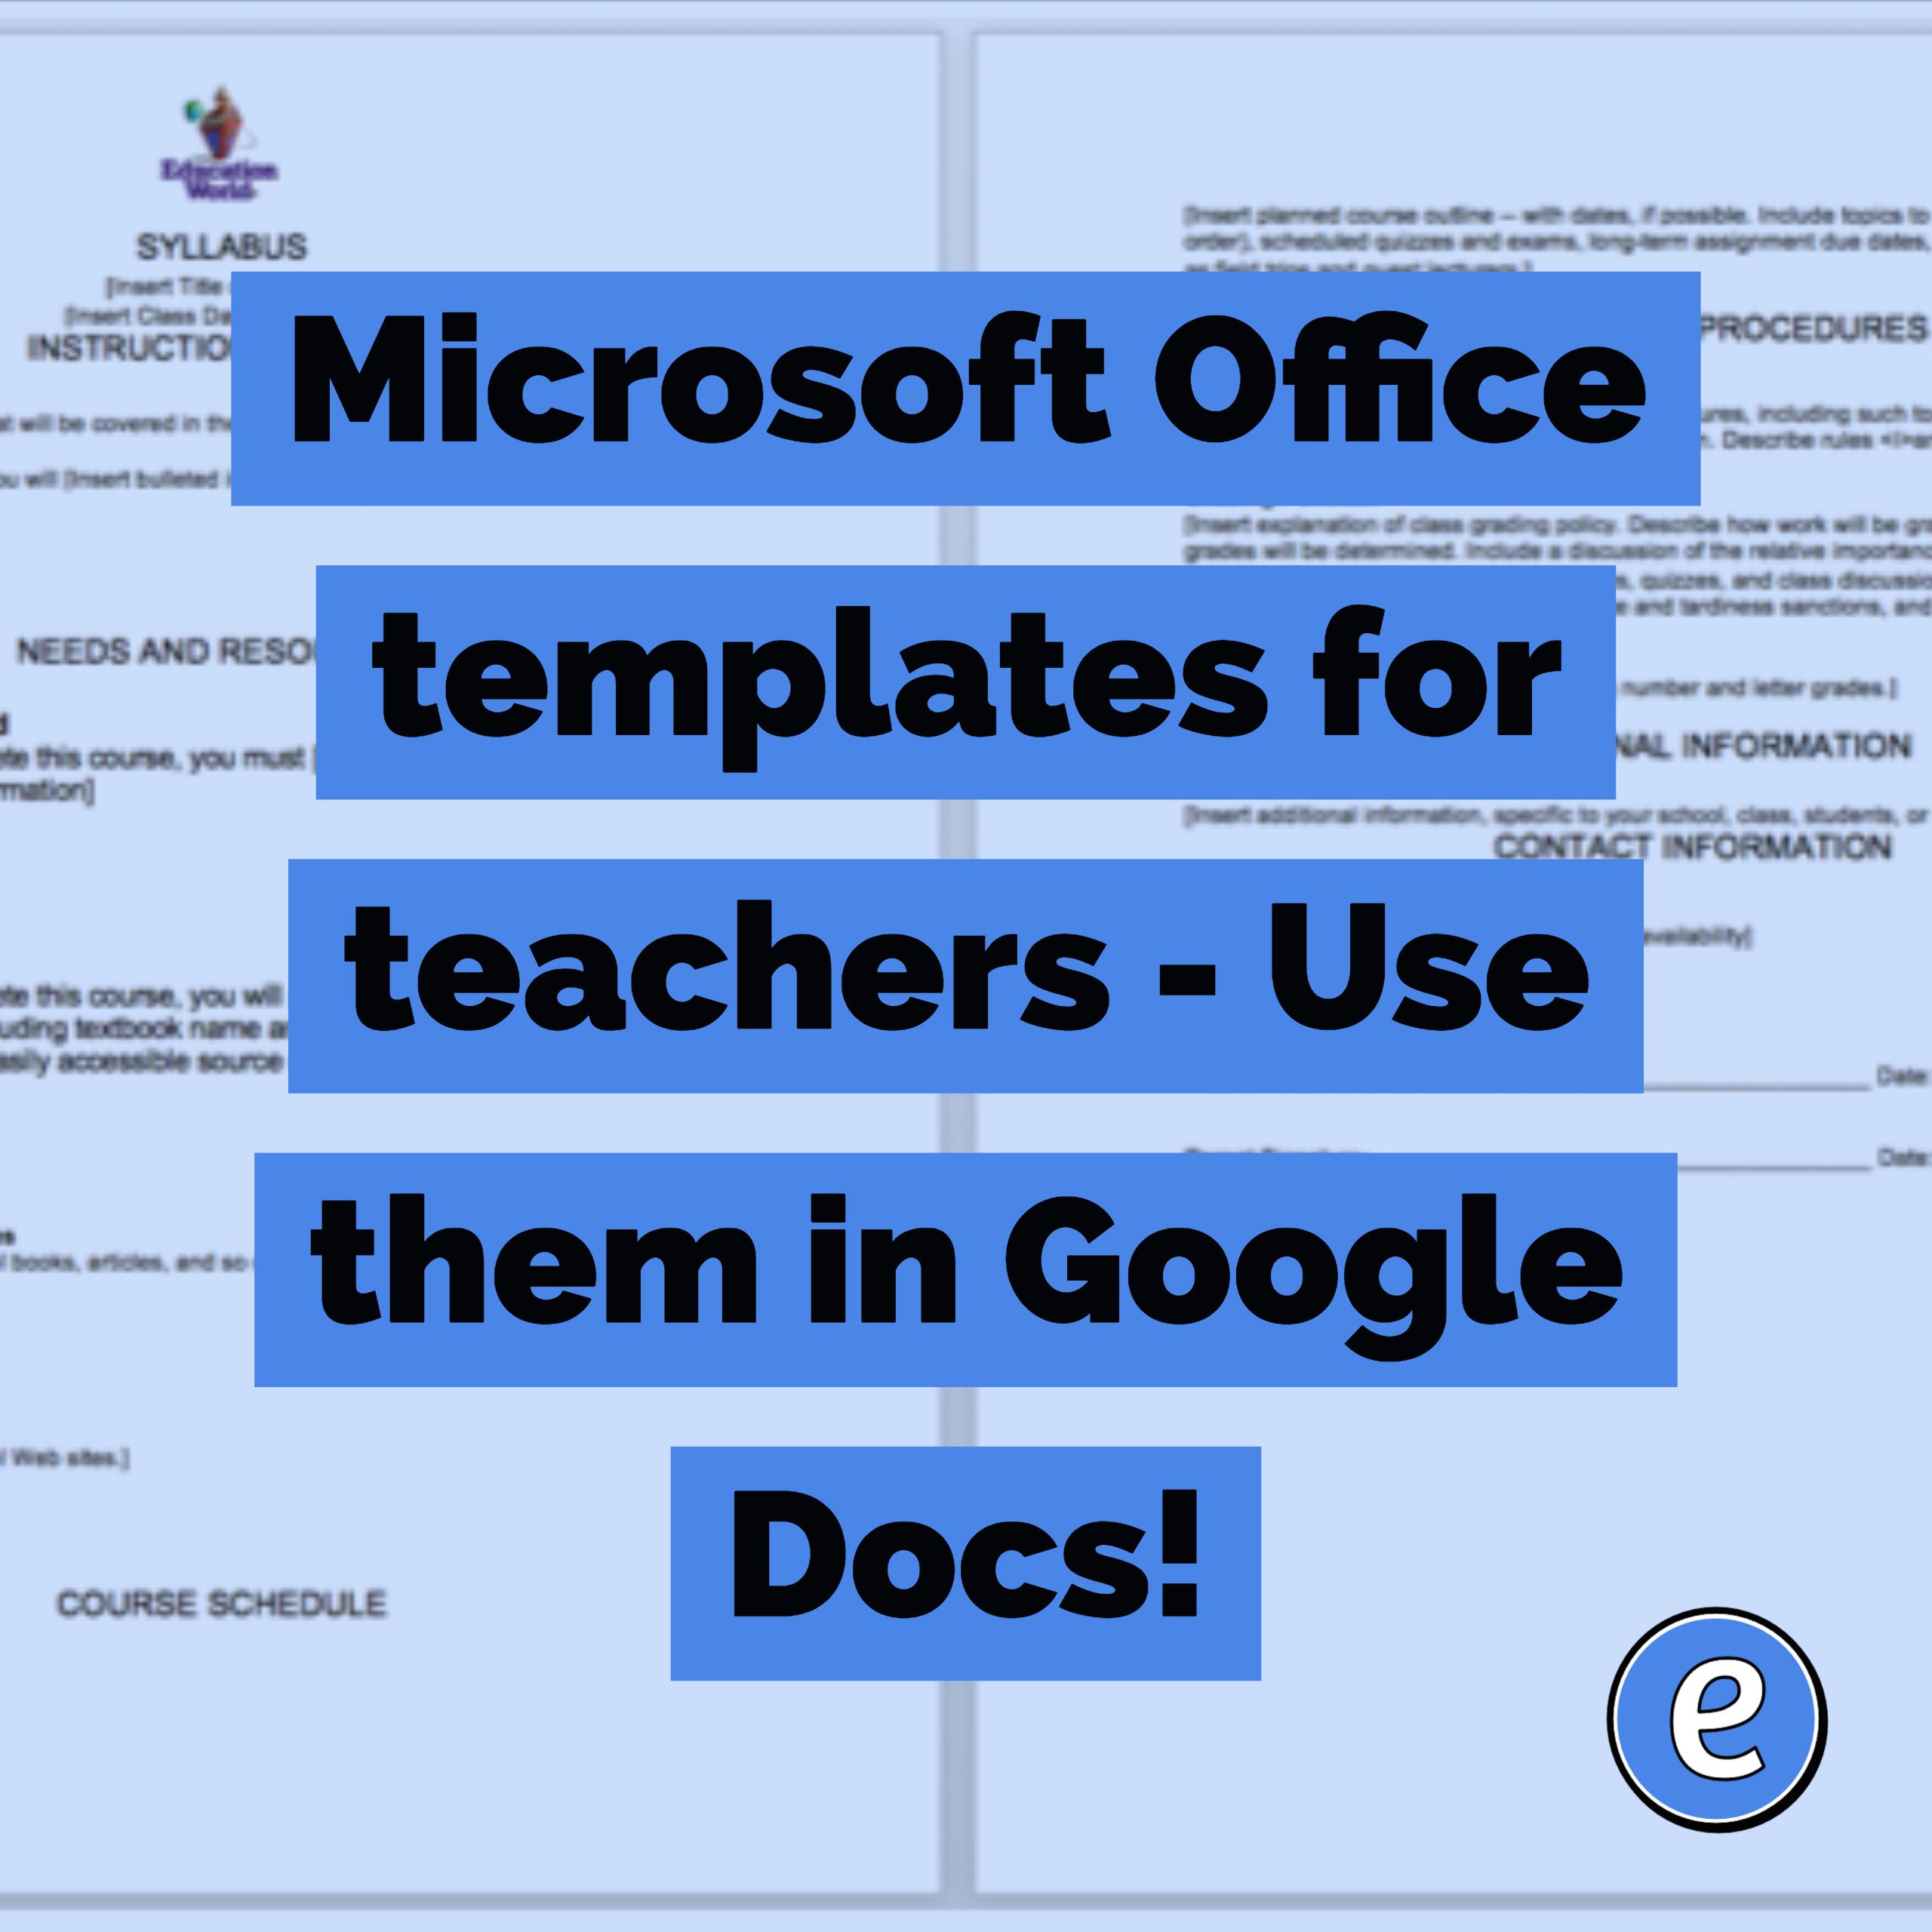 Microsoft Office templates for teachers – Use them in Google Docs!